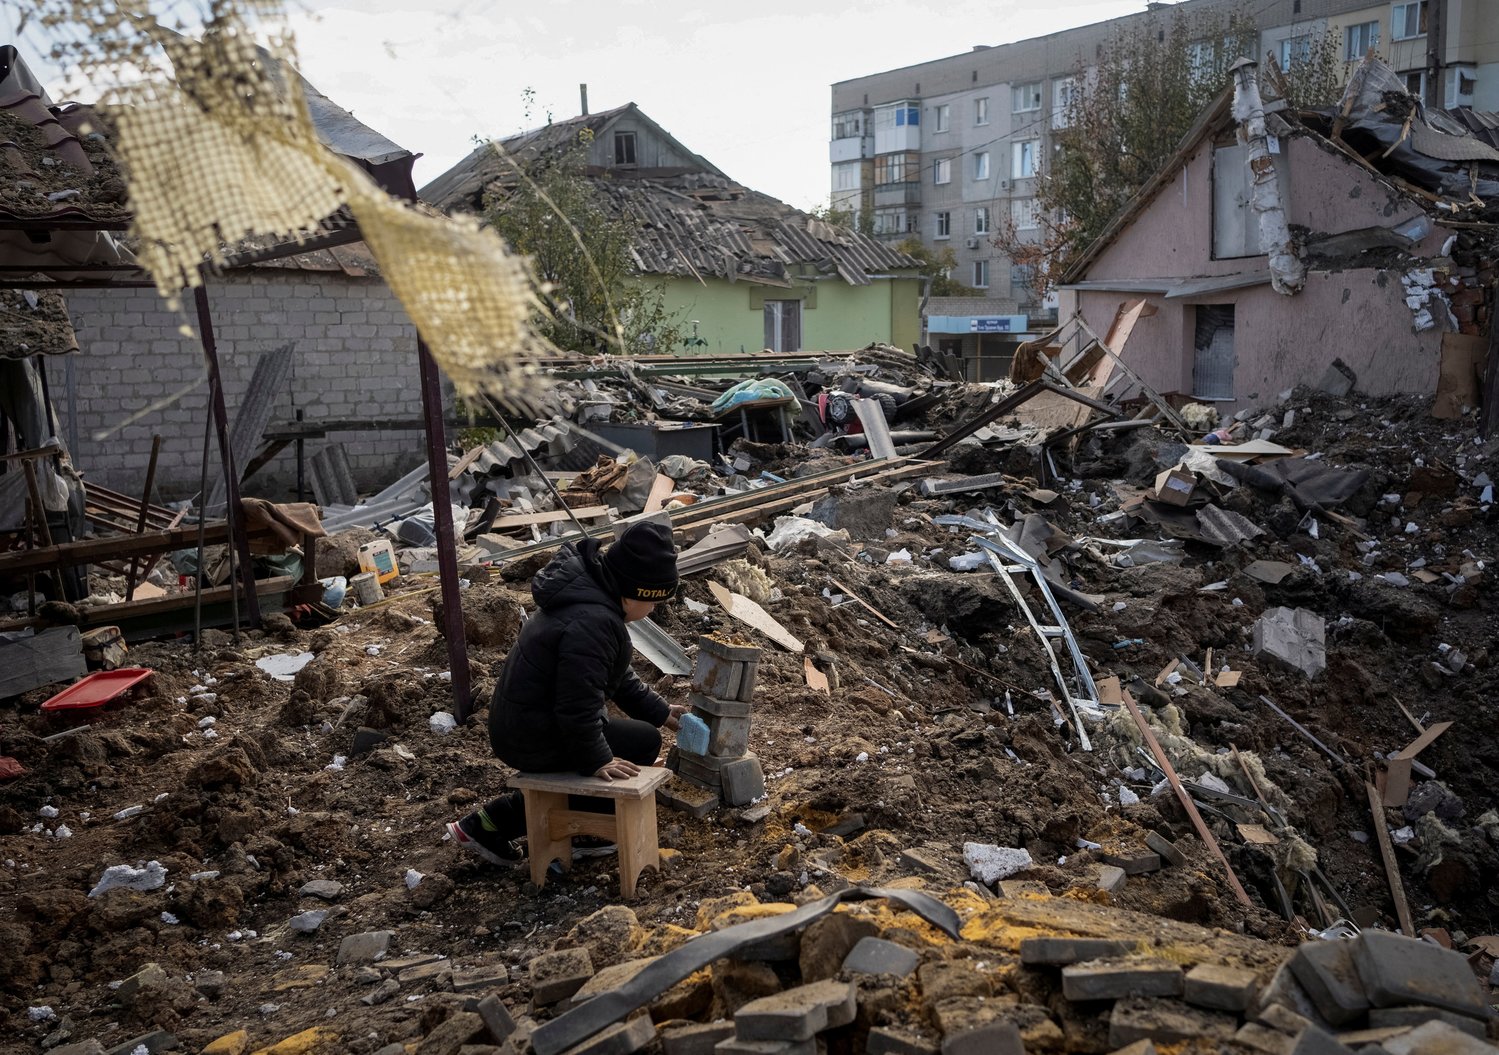 A boy plays on the ruins of his grandmother's house in Kupiansk, Ukraine, Oct. 16, 2022, amid Russia's attack on Ukraine. (CNS photo/Anastasia Vlasova, Reuters)